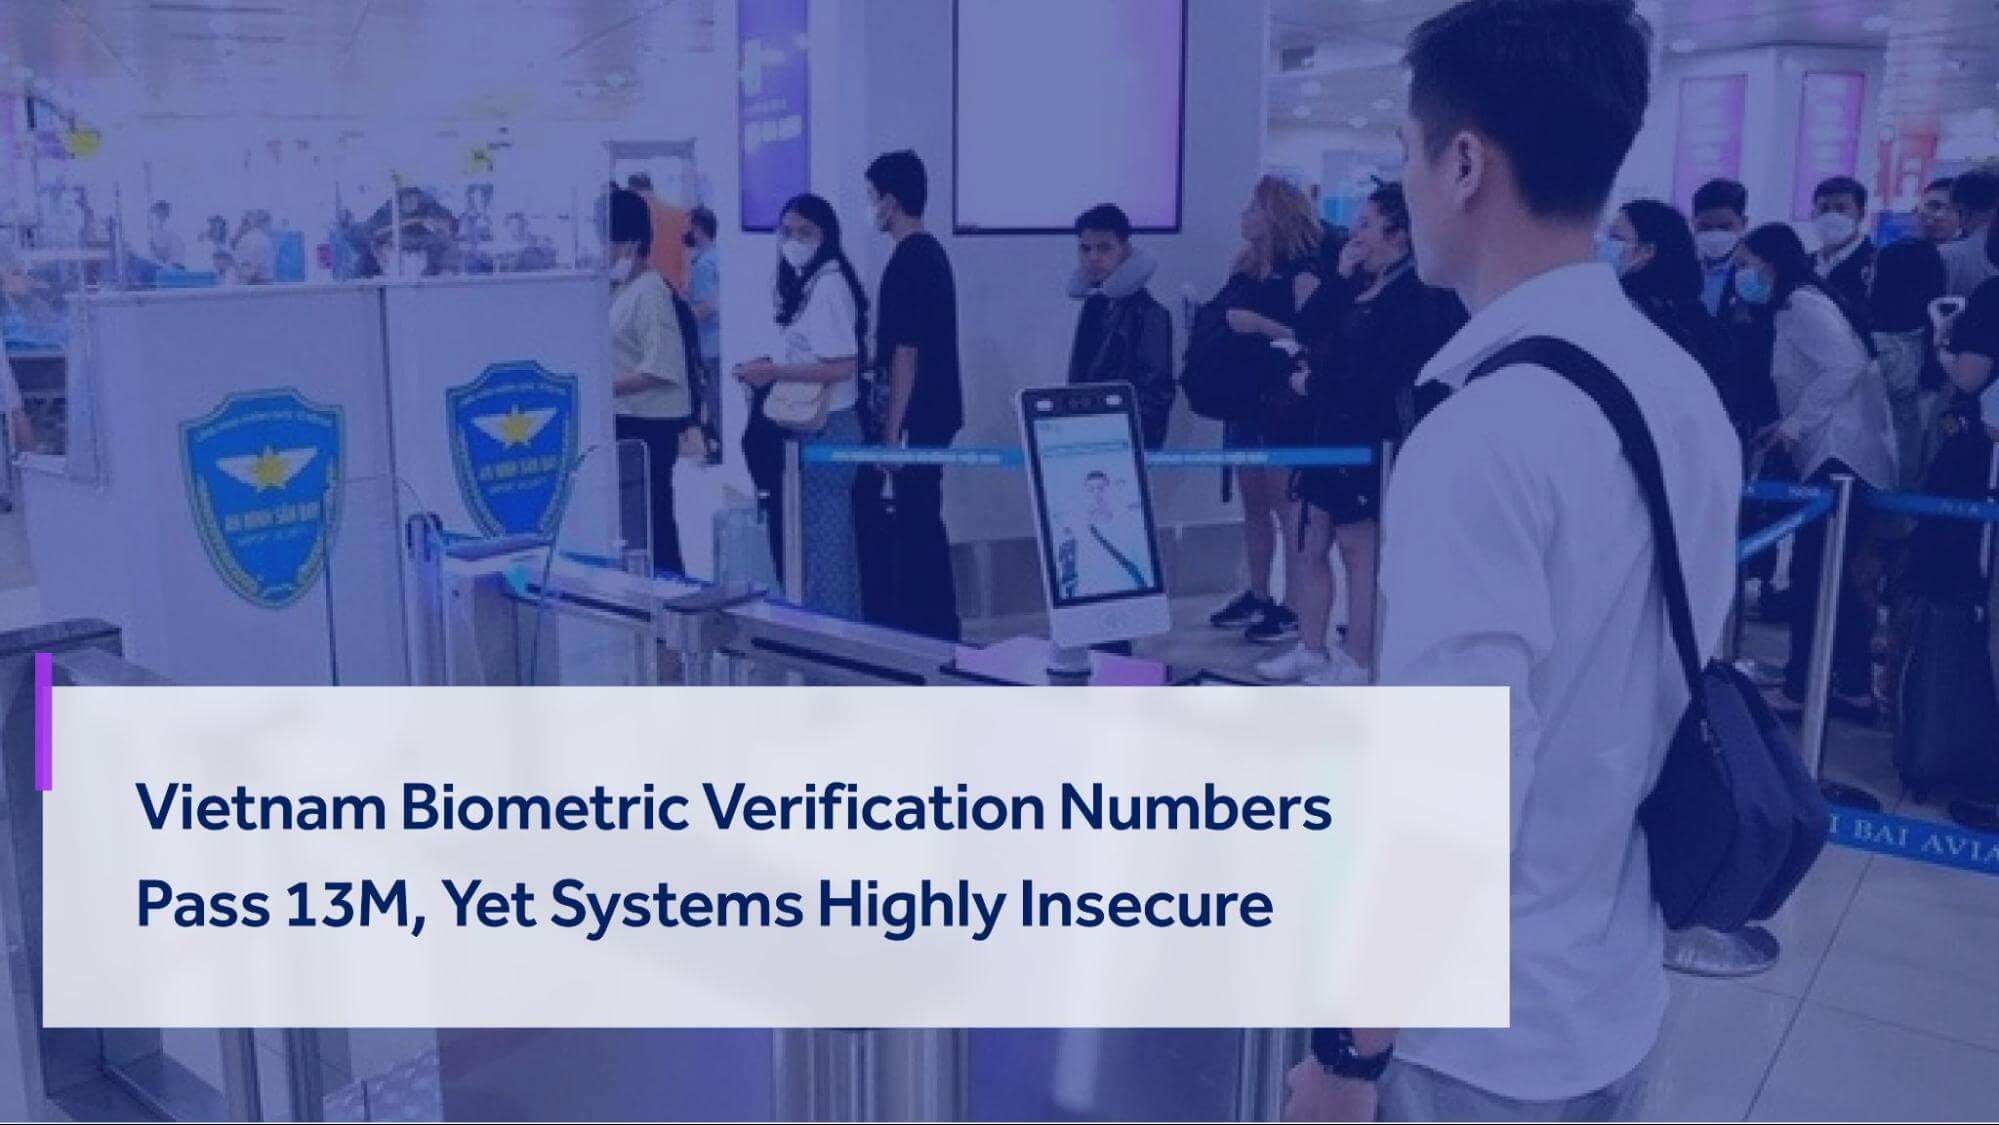 Over 13 million people have already been authenticated through biometric verification in Vietnam, but the systems seem highly vulnerable to attacks.